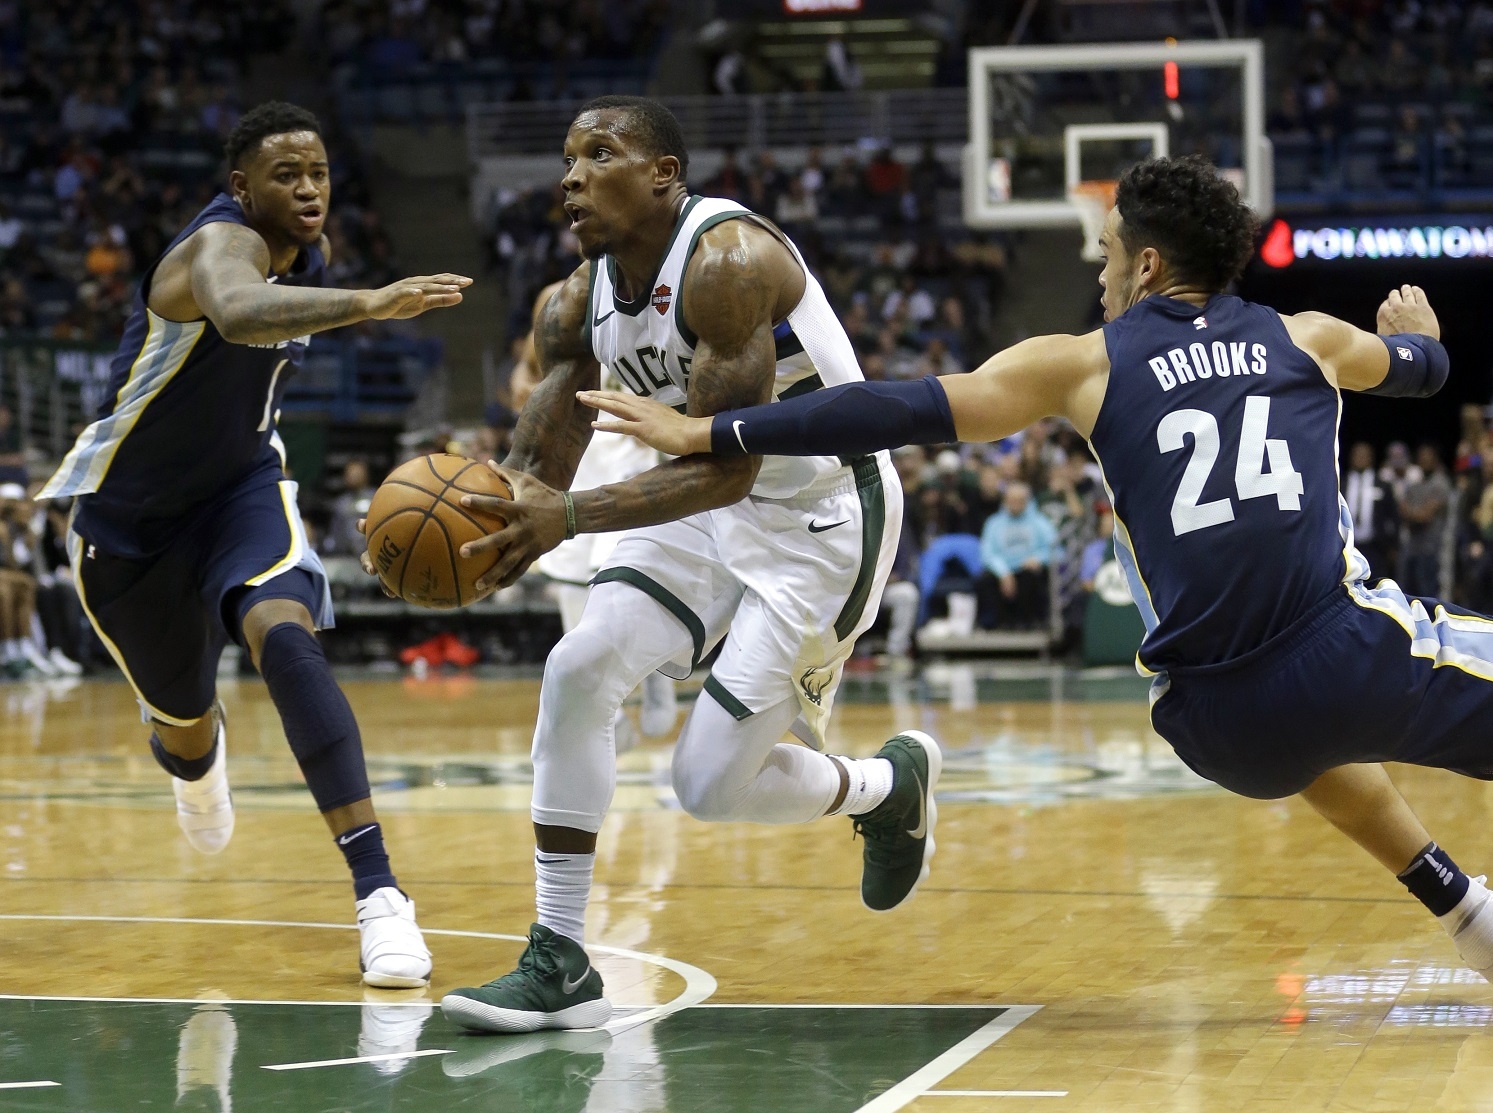 Bucks beat Grizzlies, move to 3-0 with Bledsoe, despite knee injury